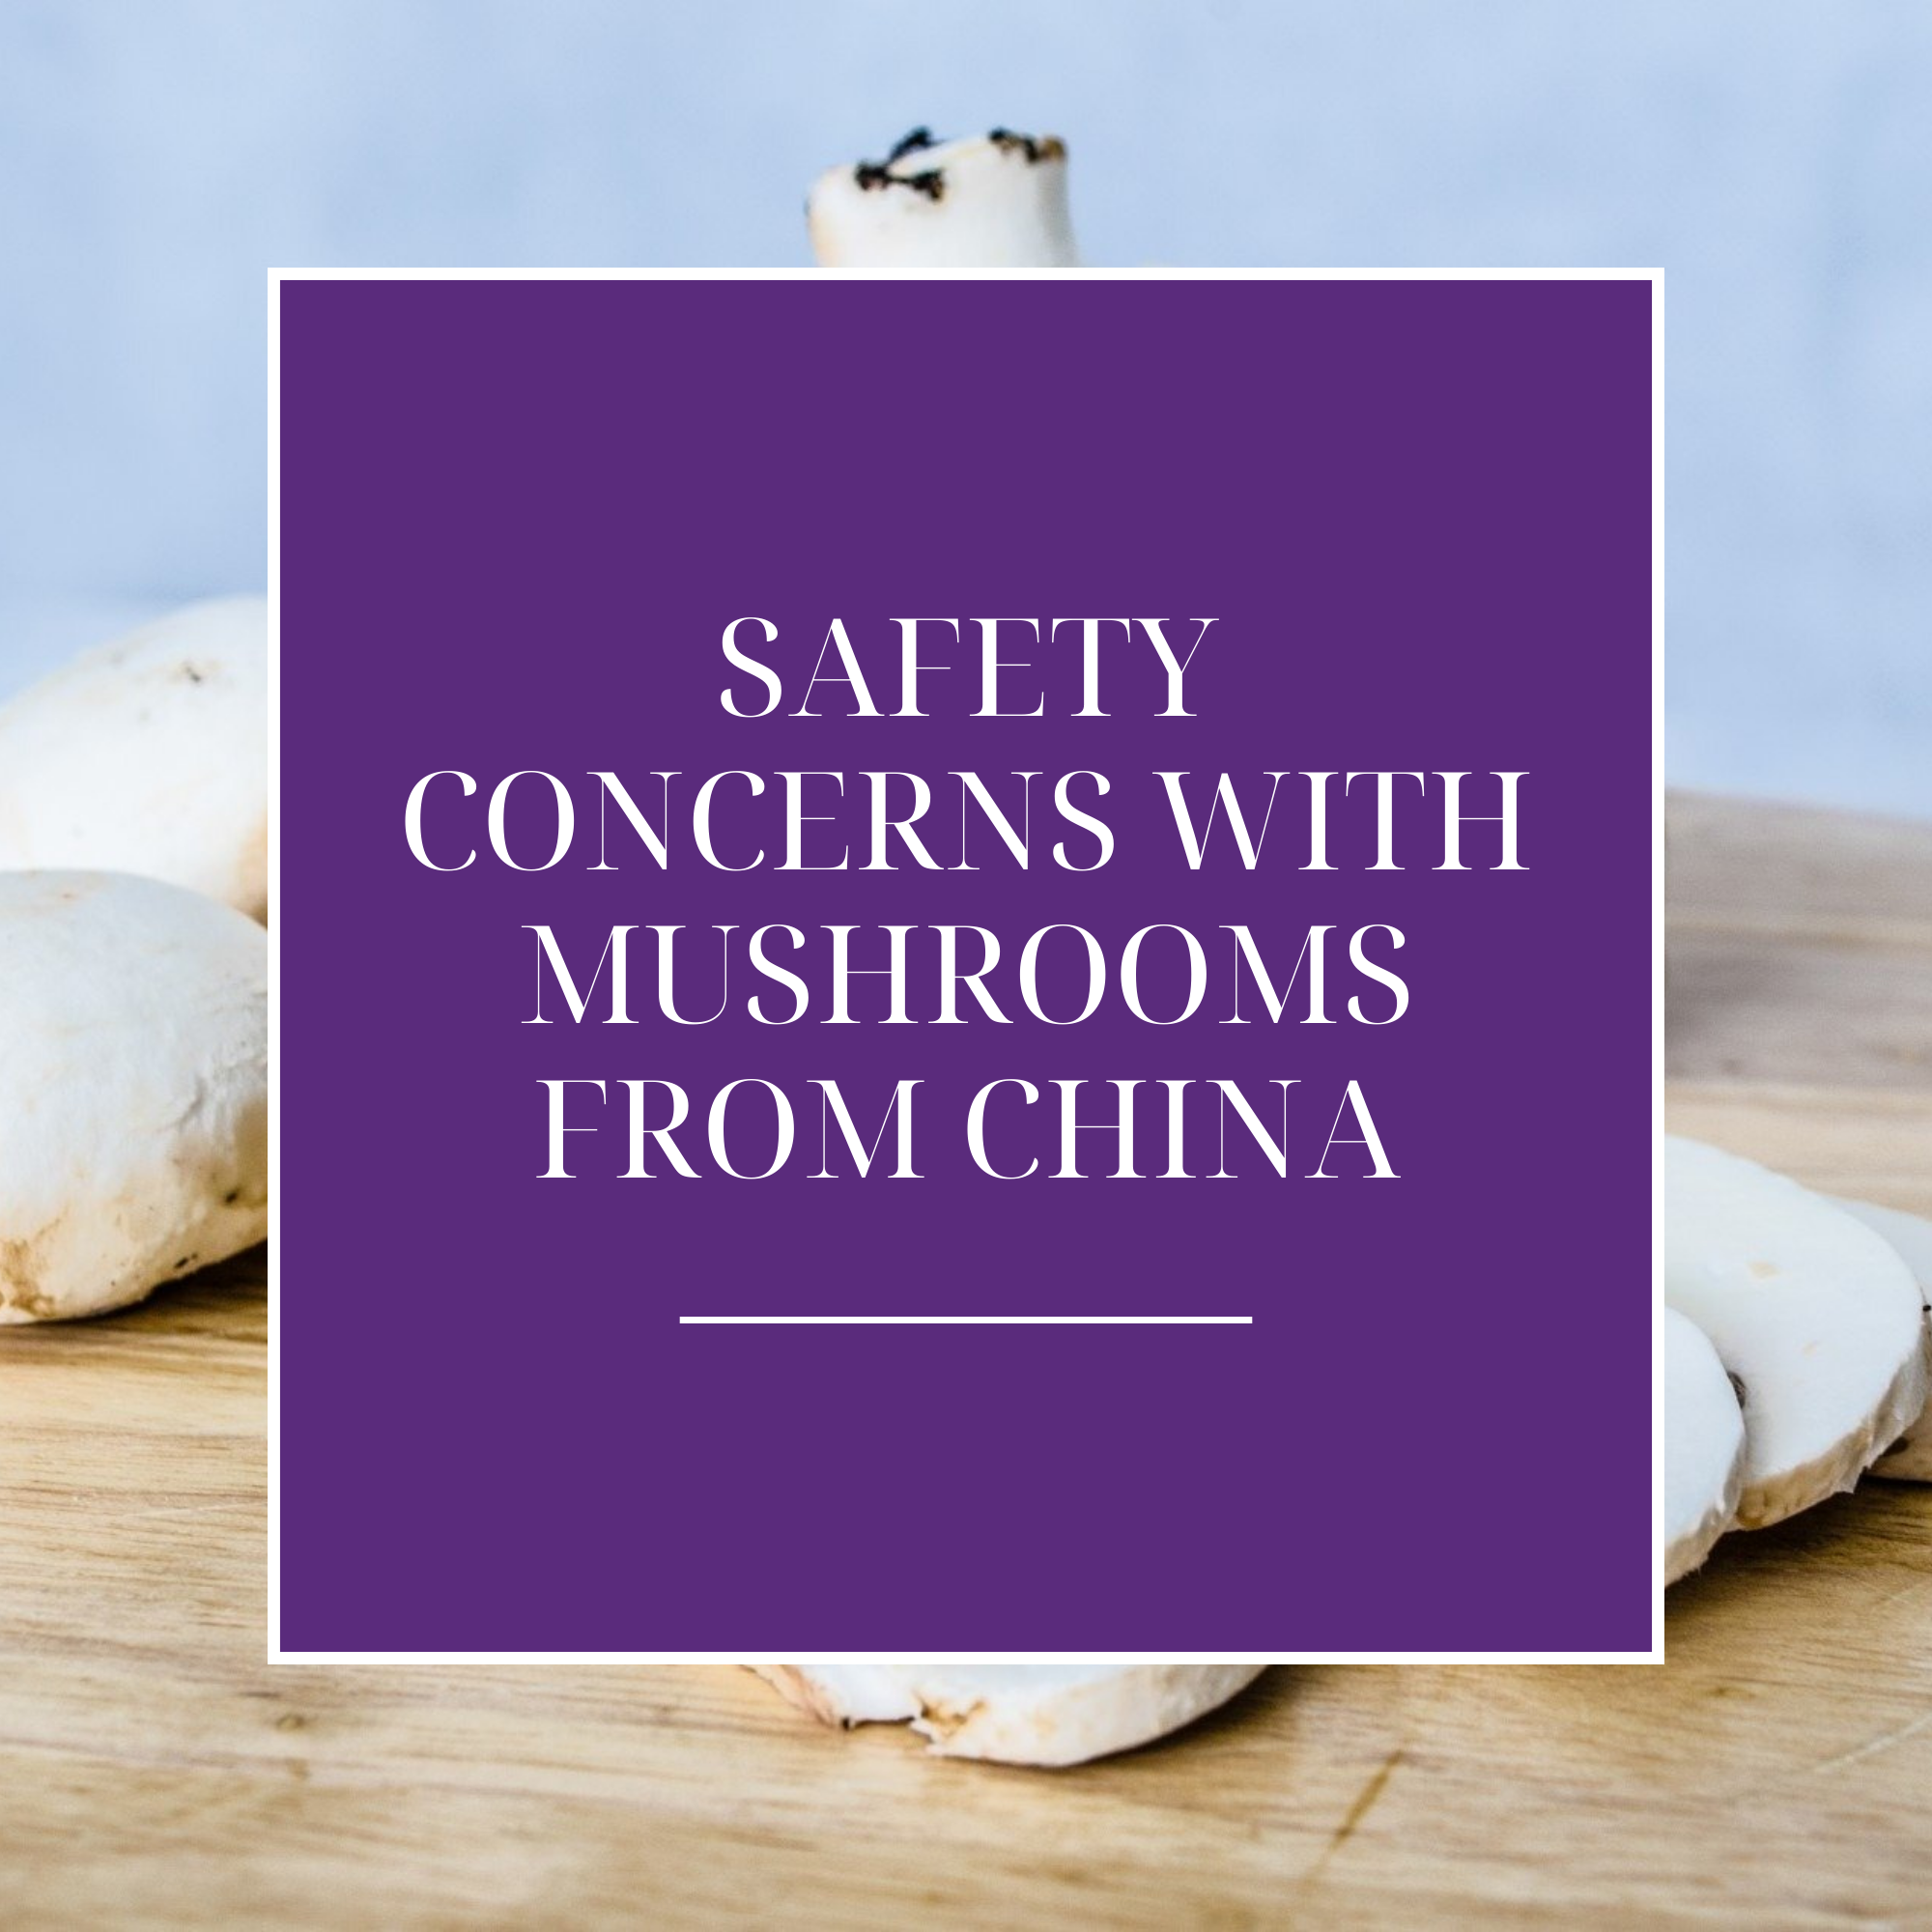 Avoid Mushrooms from China: Safety Concerns Addressed